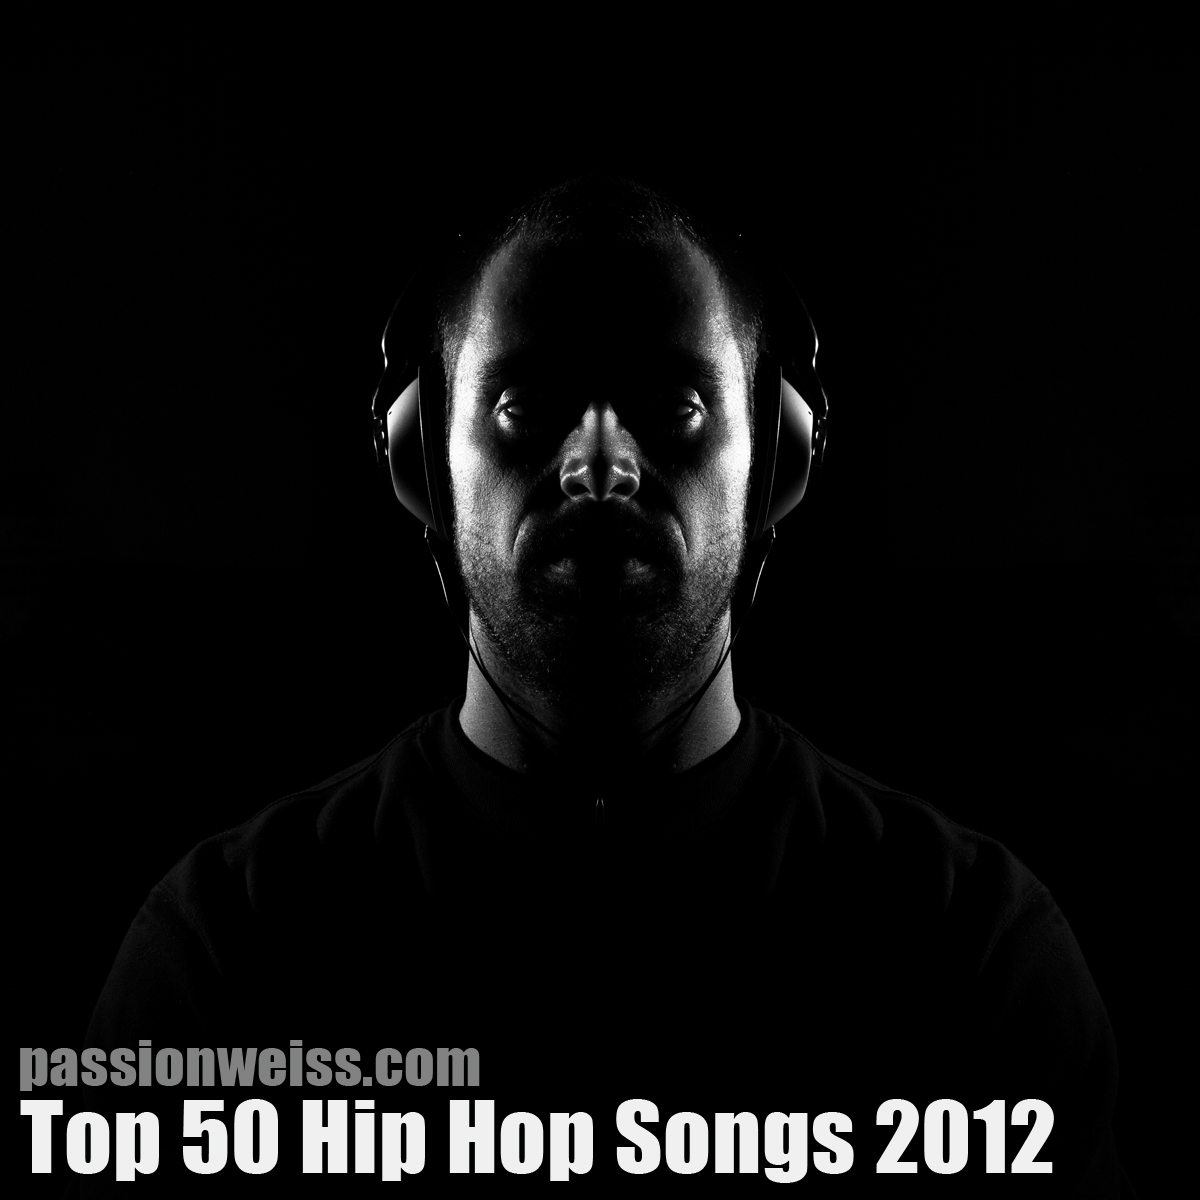 Love Quotes From Hip Hop Songs 2011 ~ Top 14 Hip-Hop Love Songs